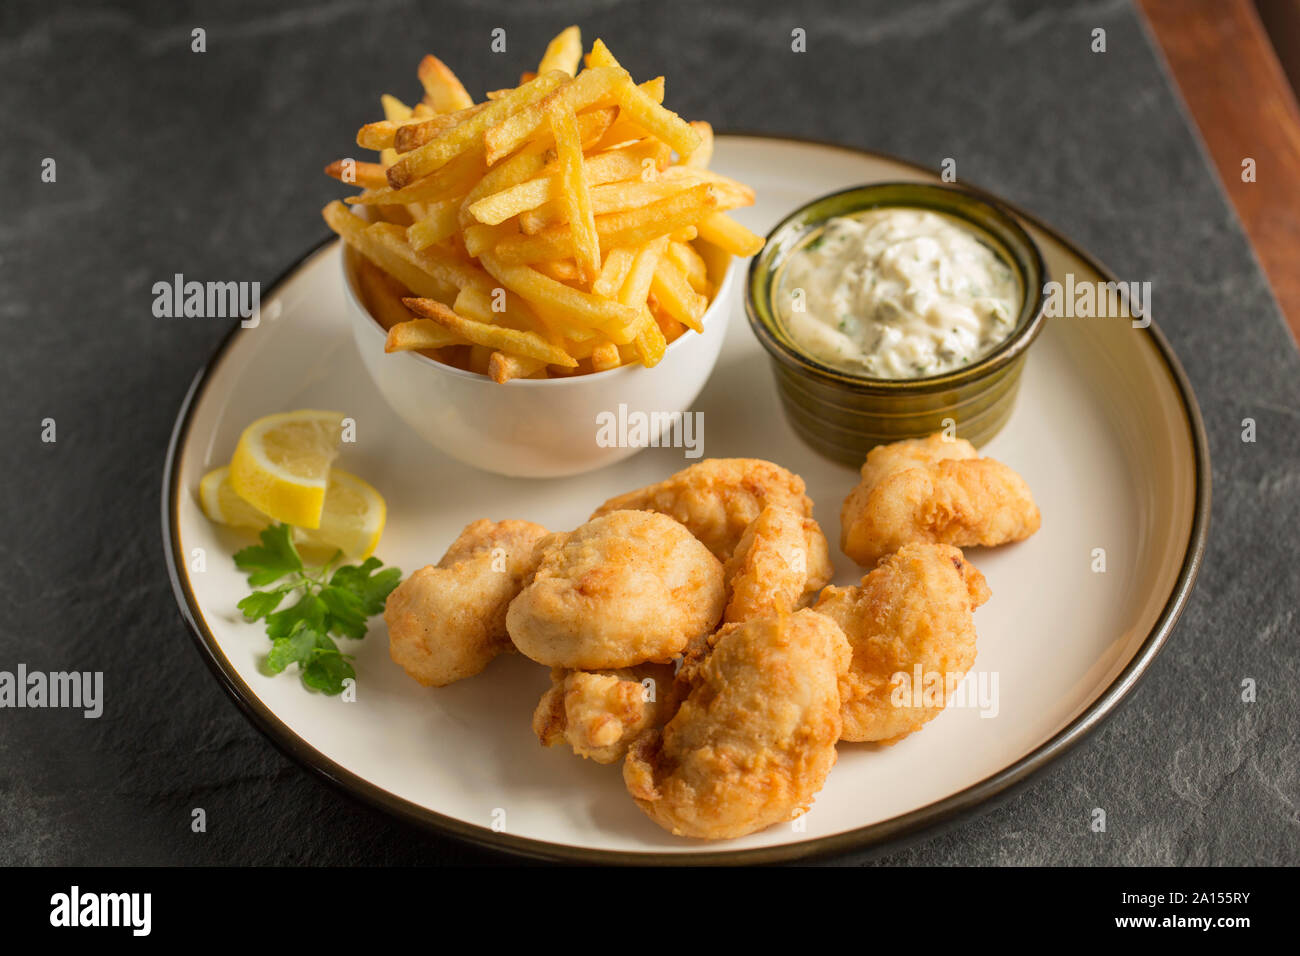 Ray cheeks that have been coated in flour and deep fried and served with chips and garlic, caper and parsely mayonnaise. Ray cheeks are sometimes call Stock Photo